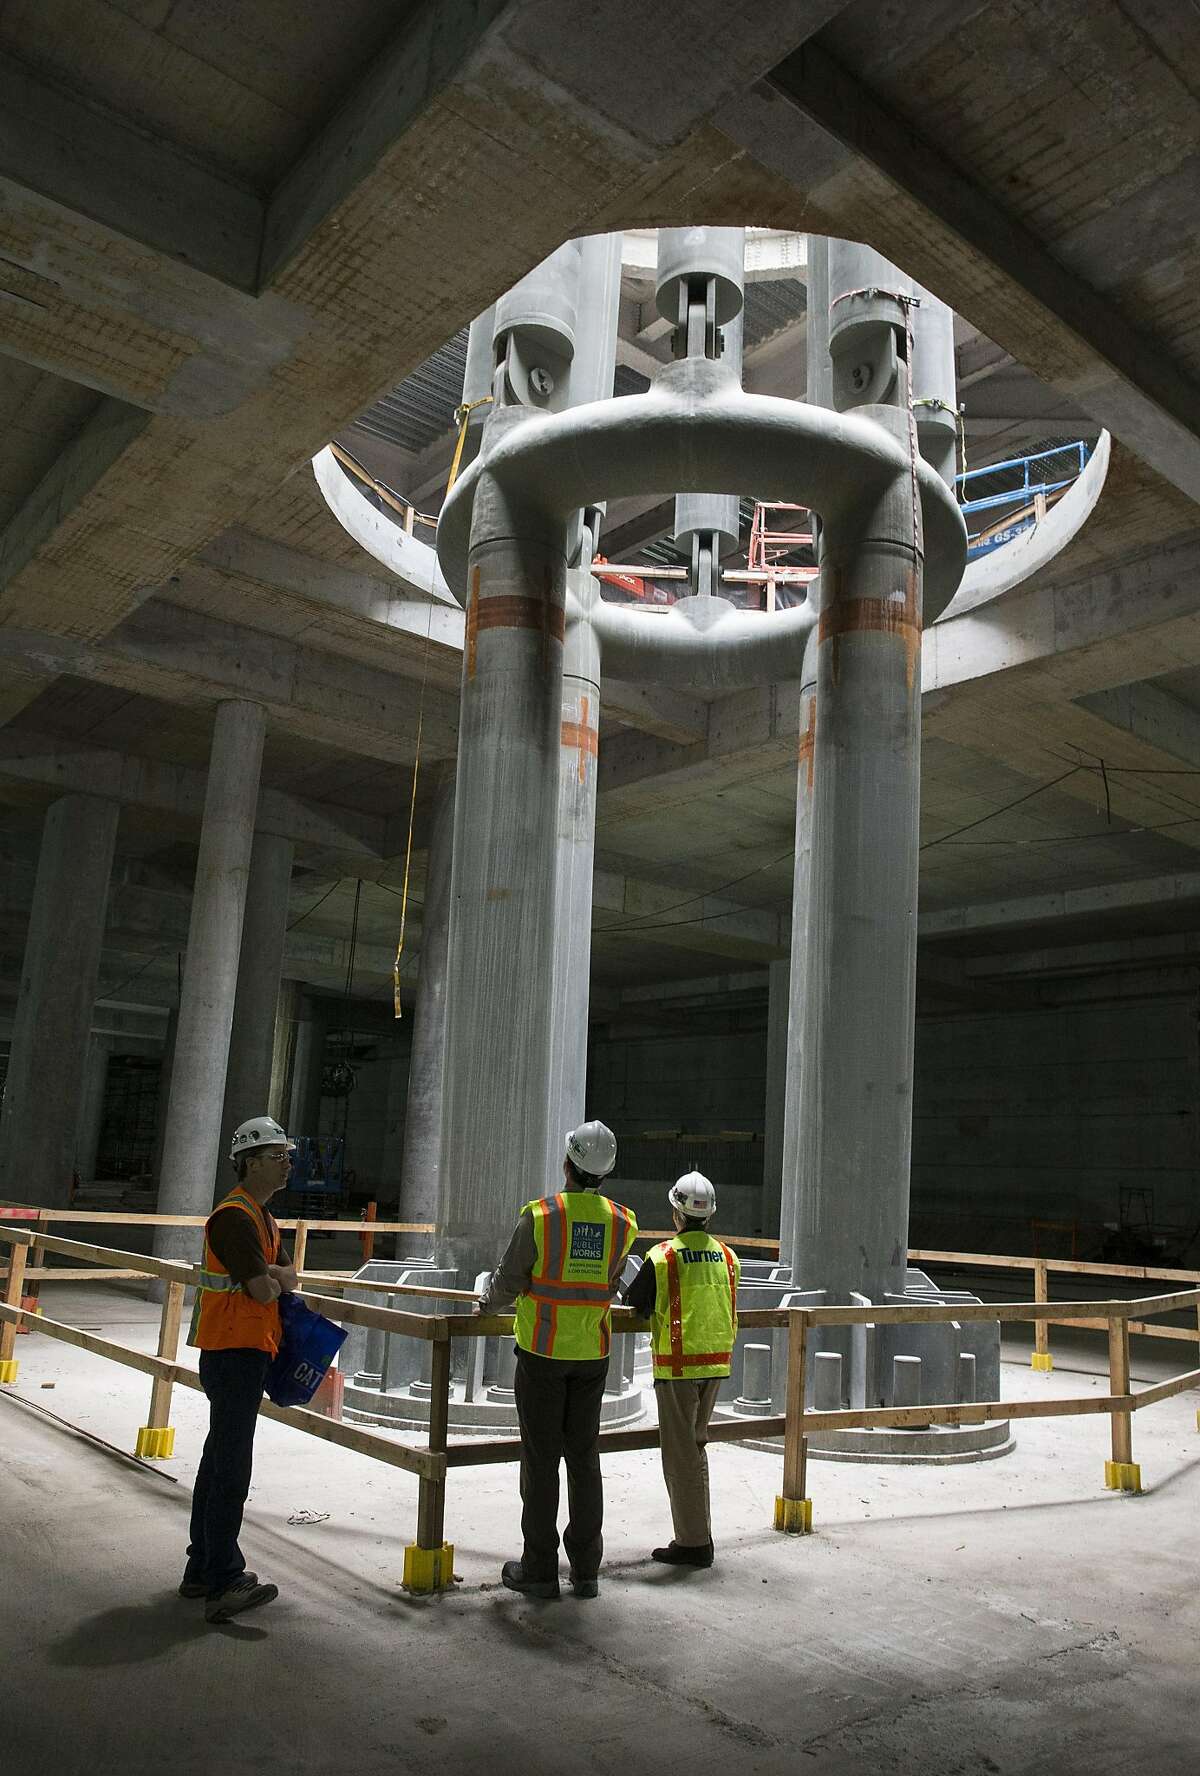 A light column is seen from the train level of the Transbay Transit Center during a tour of the building currently under construction in San Francisco, Calif., on Saturday, June 4, 2016.